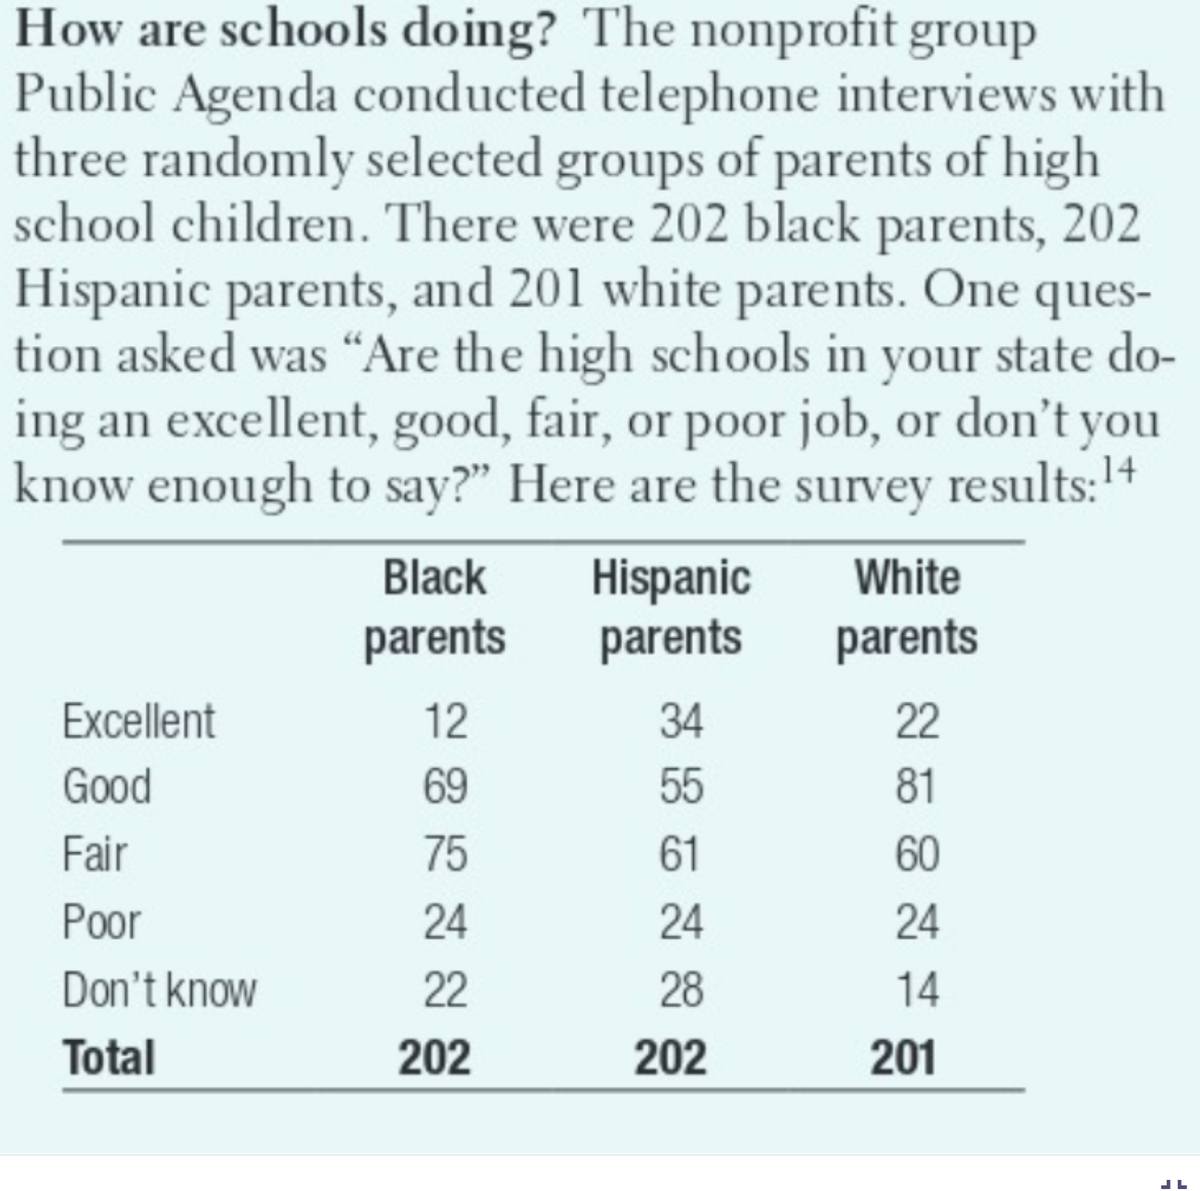 How are schools doing? The nonprofit group
Public Agenda conducted telephone interviews with
three randomly selected groups of parents of high
school children. There were 202 black parents, 202
Hispanic parents, and 201 white parents. One ques-
tion asked was "Are the high schools in your state do-
ing an excellent, good, fair, or poor job, or don't you
know enough to say?" Here are the survey results:¹+
Excellent
Good
Fair
Poor
Don't know
Total
Black
parents
19226
75
24
22
202
Hispanic
parents
34
55
61
24
28
202
White
parents
22
81
60
24
14
201